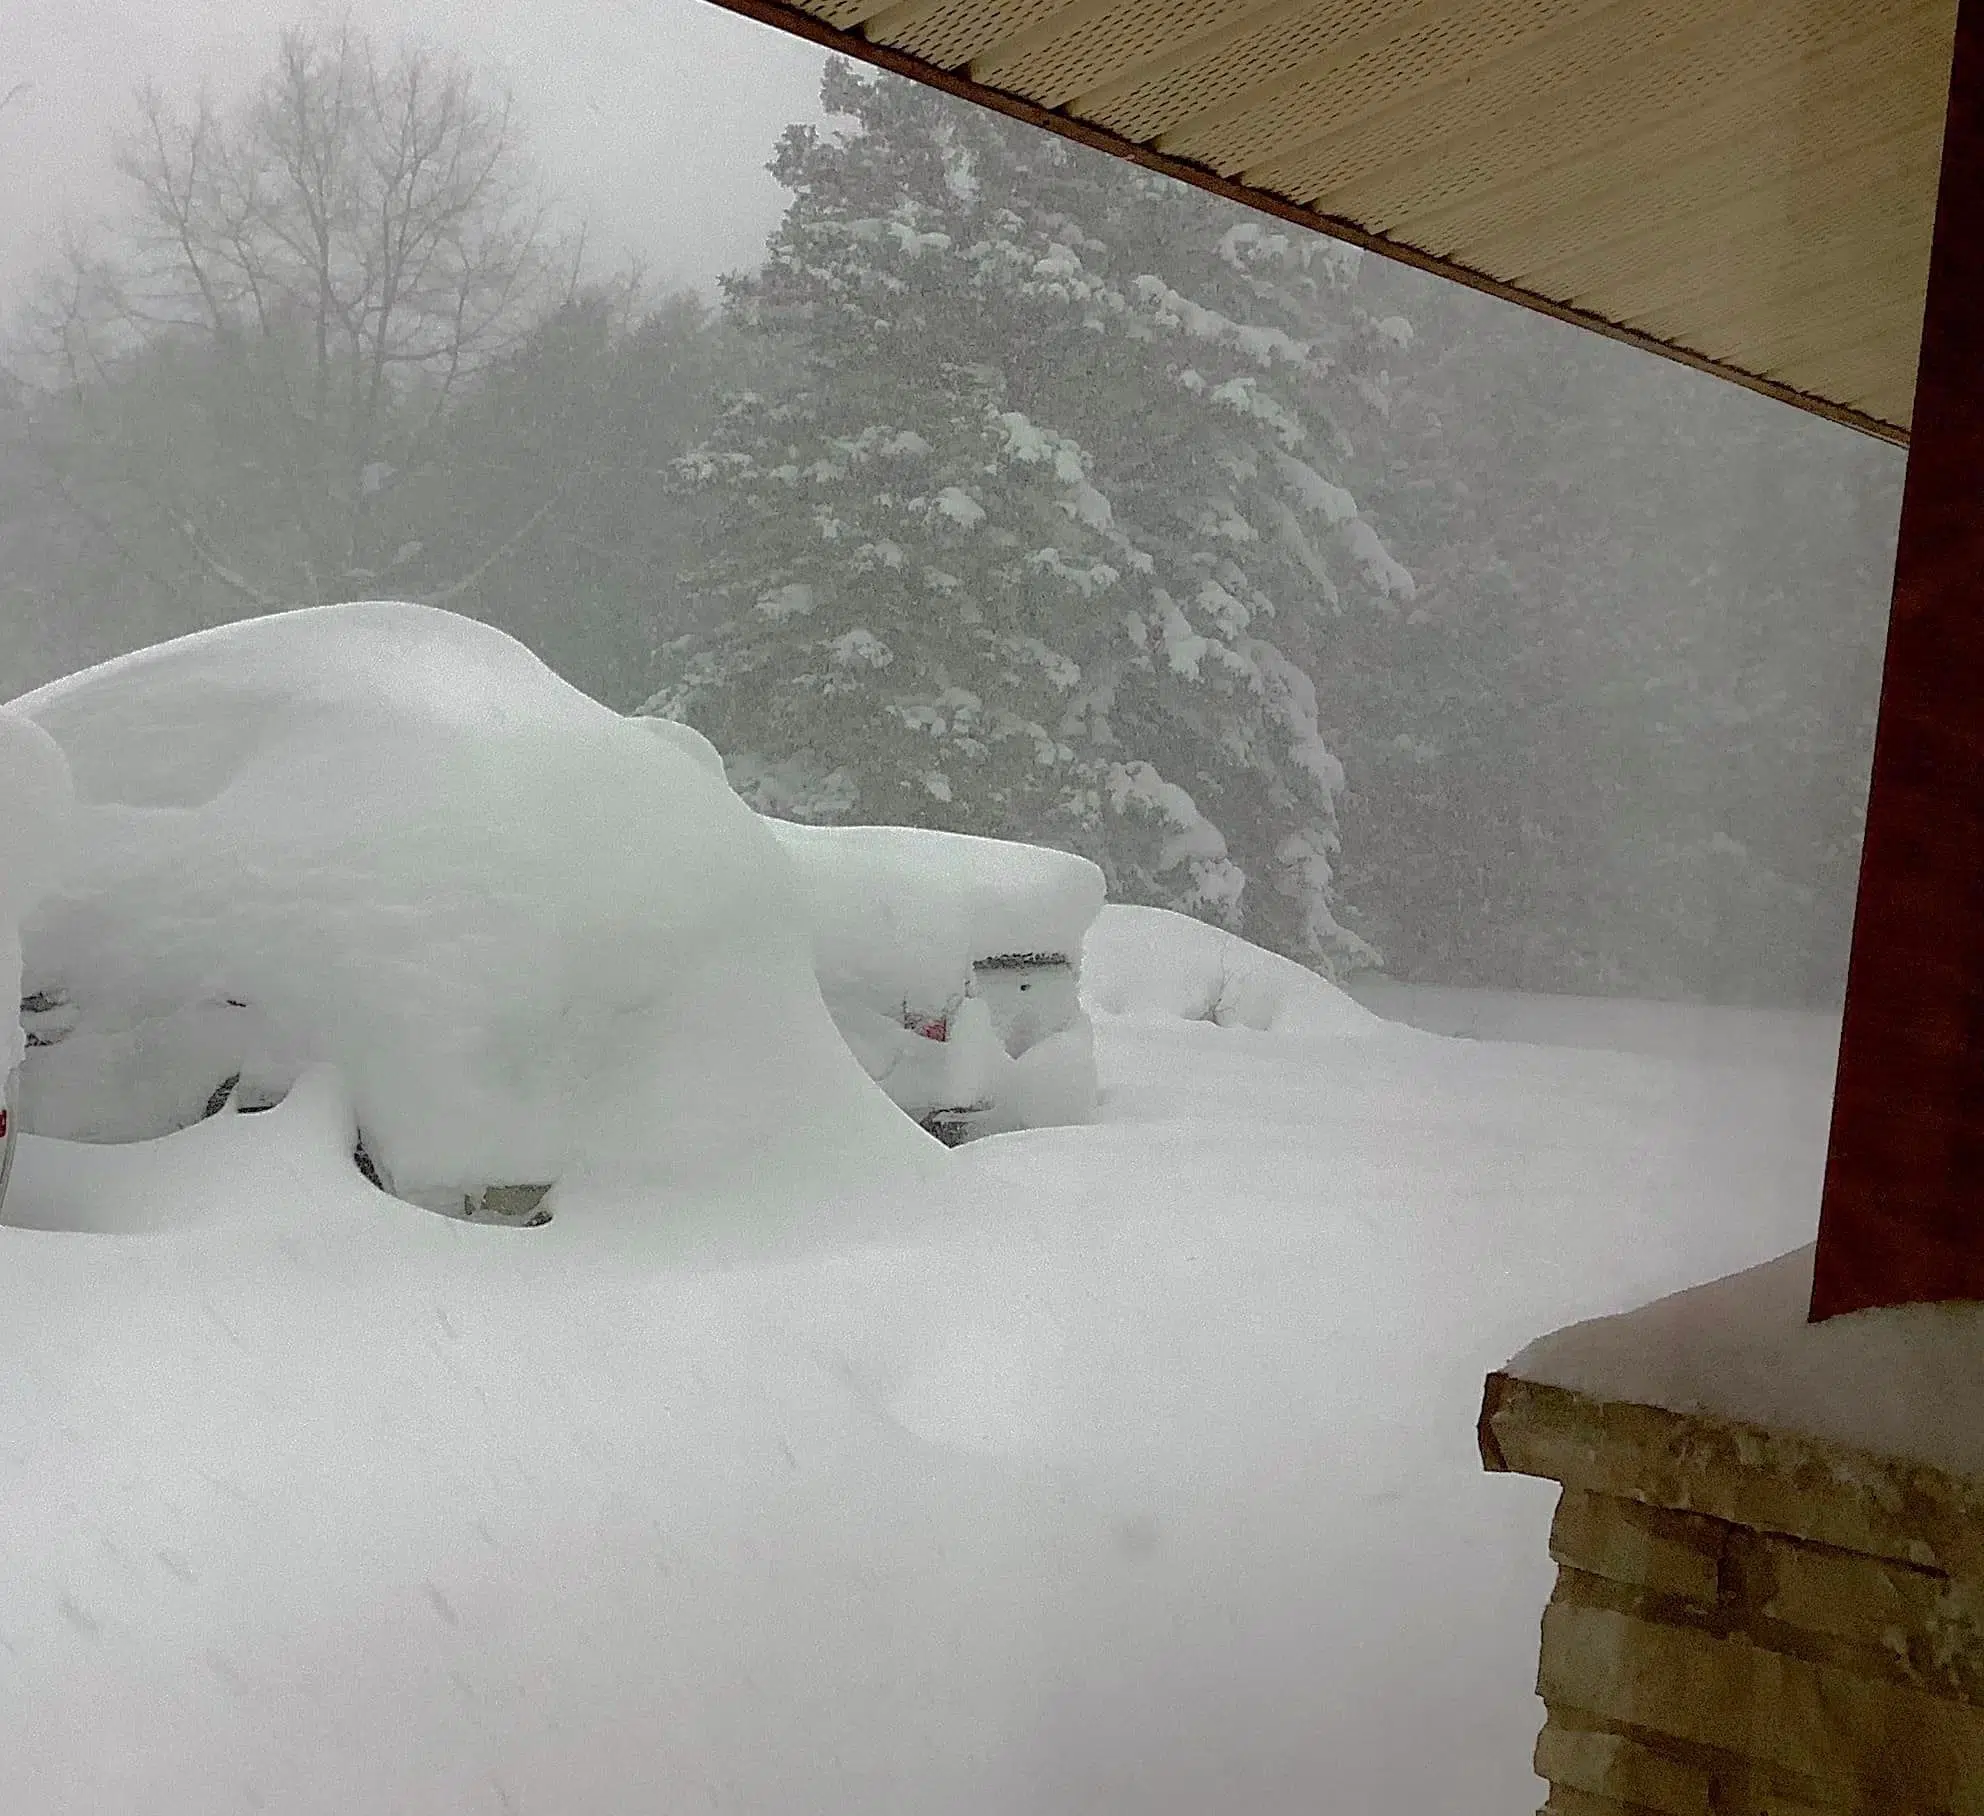 Wiarton Area Saw More Than 120 Centimetres Of Snow During Multi-Day Squall Event